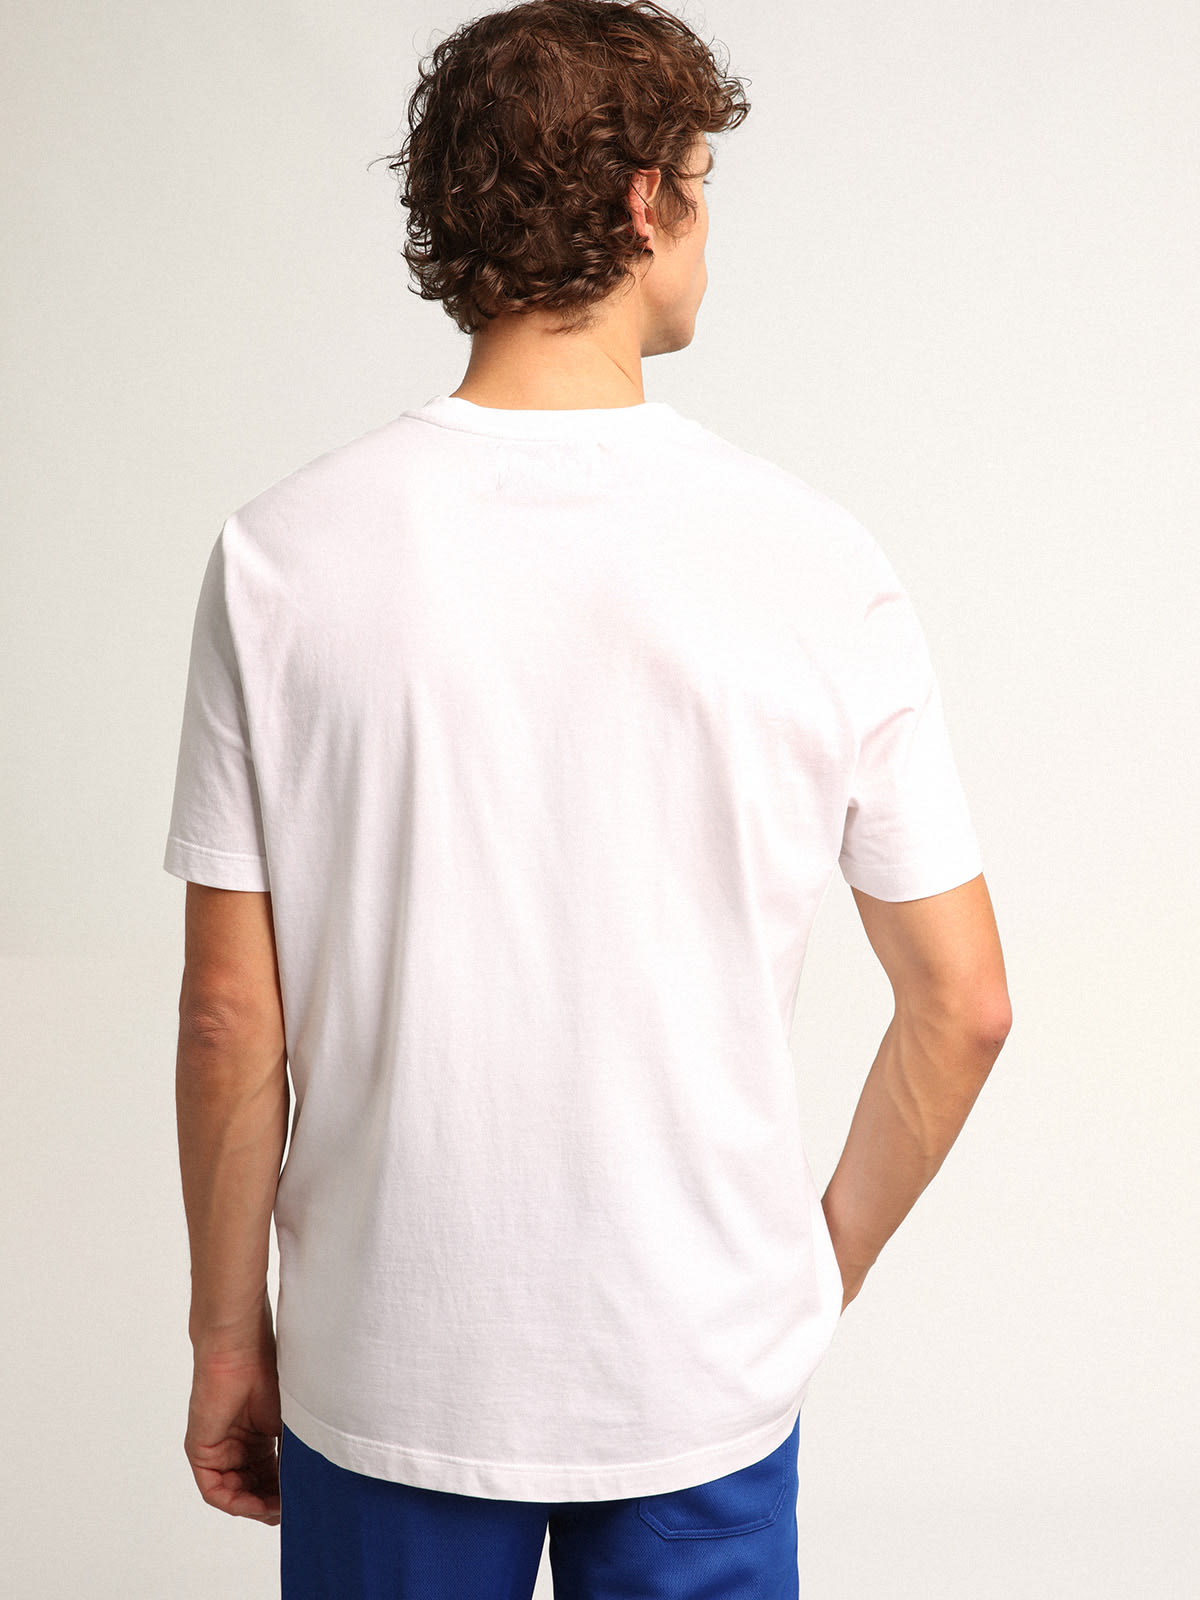 Golden Goose - Star Collection T-shirt in white with contrasting red star on the front in 